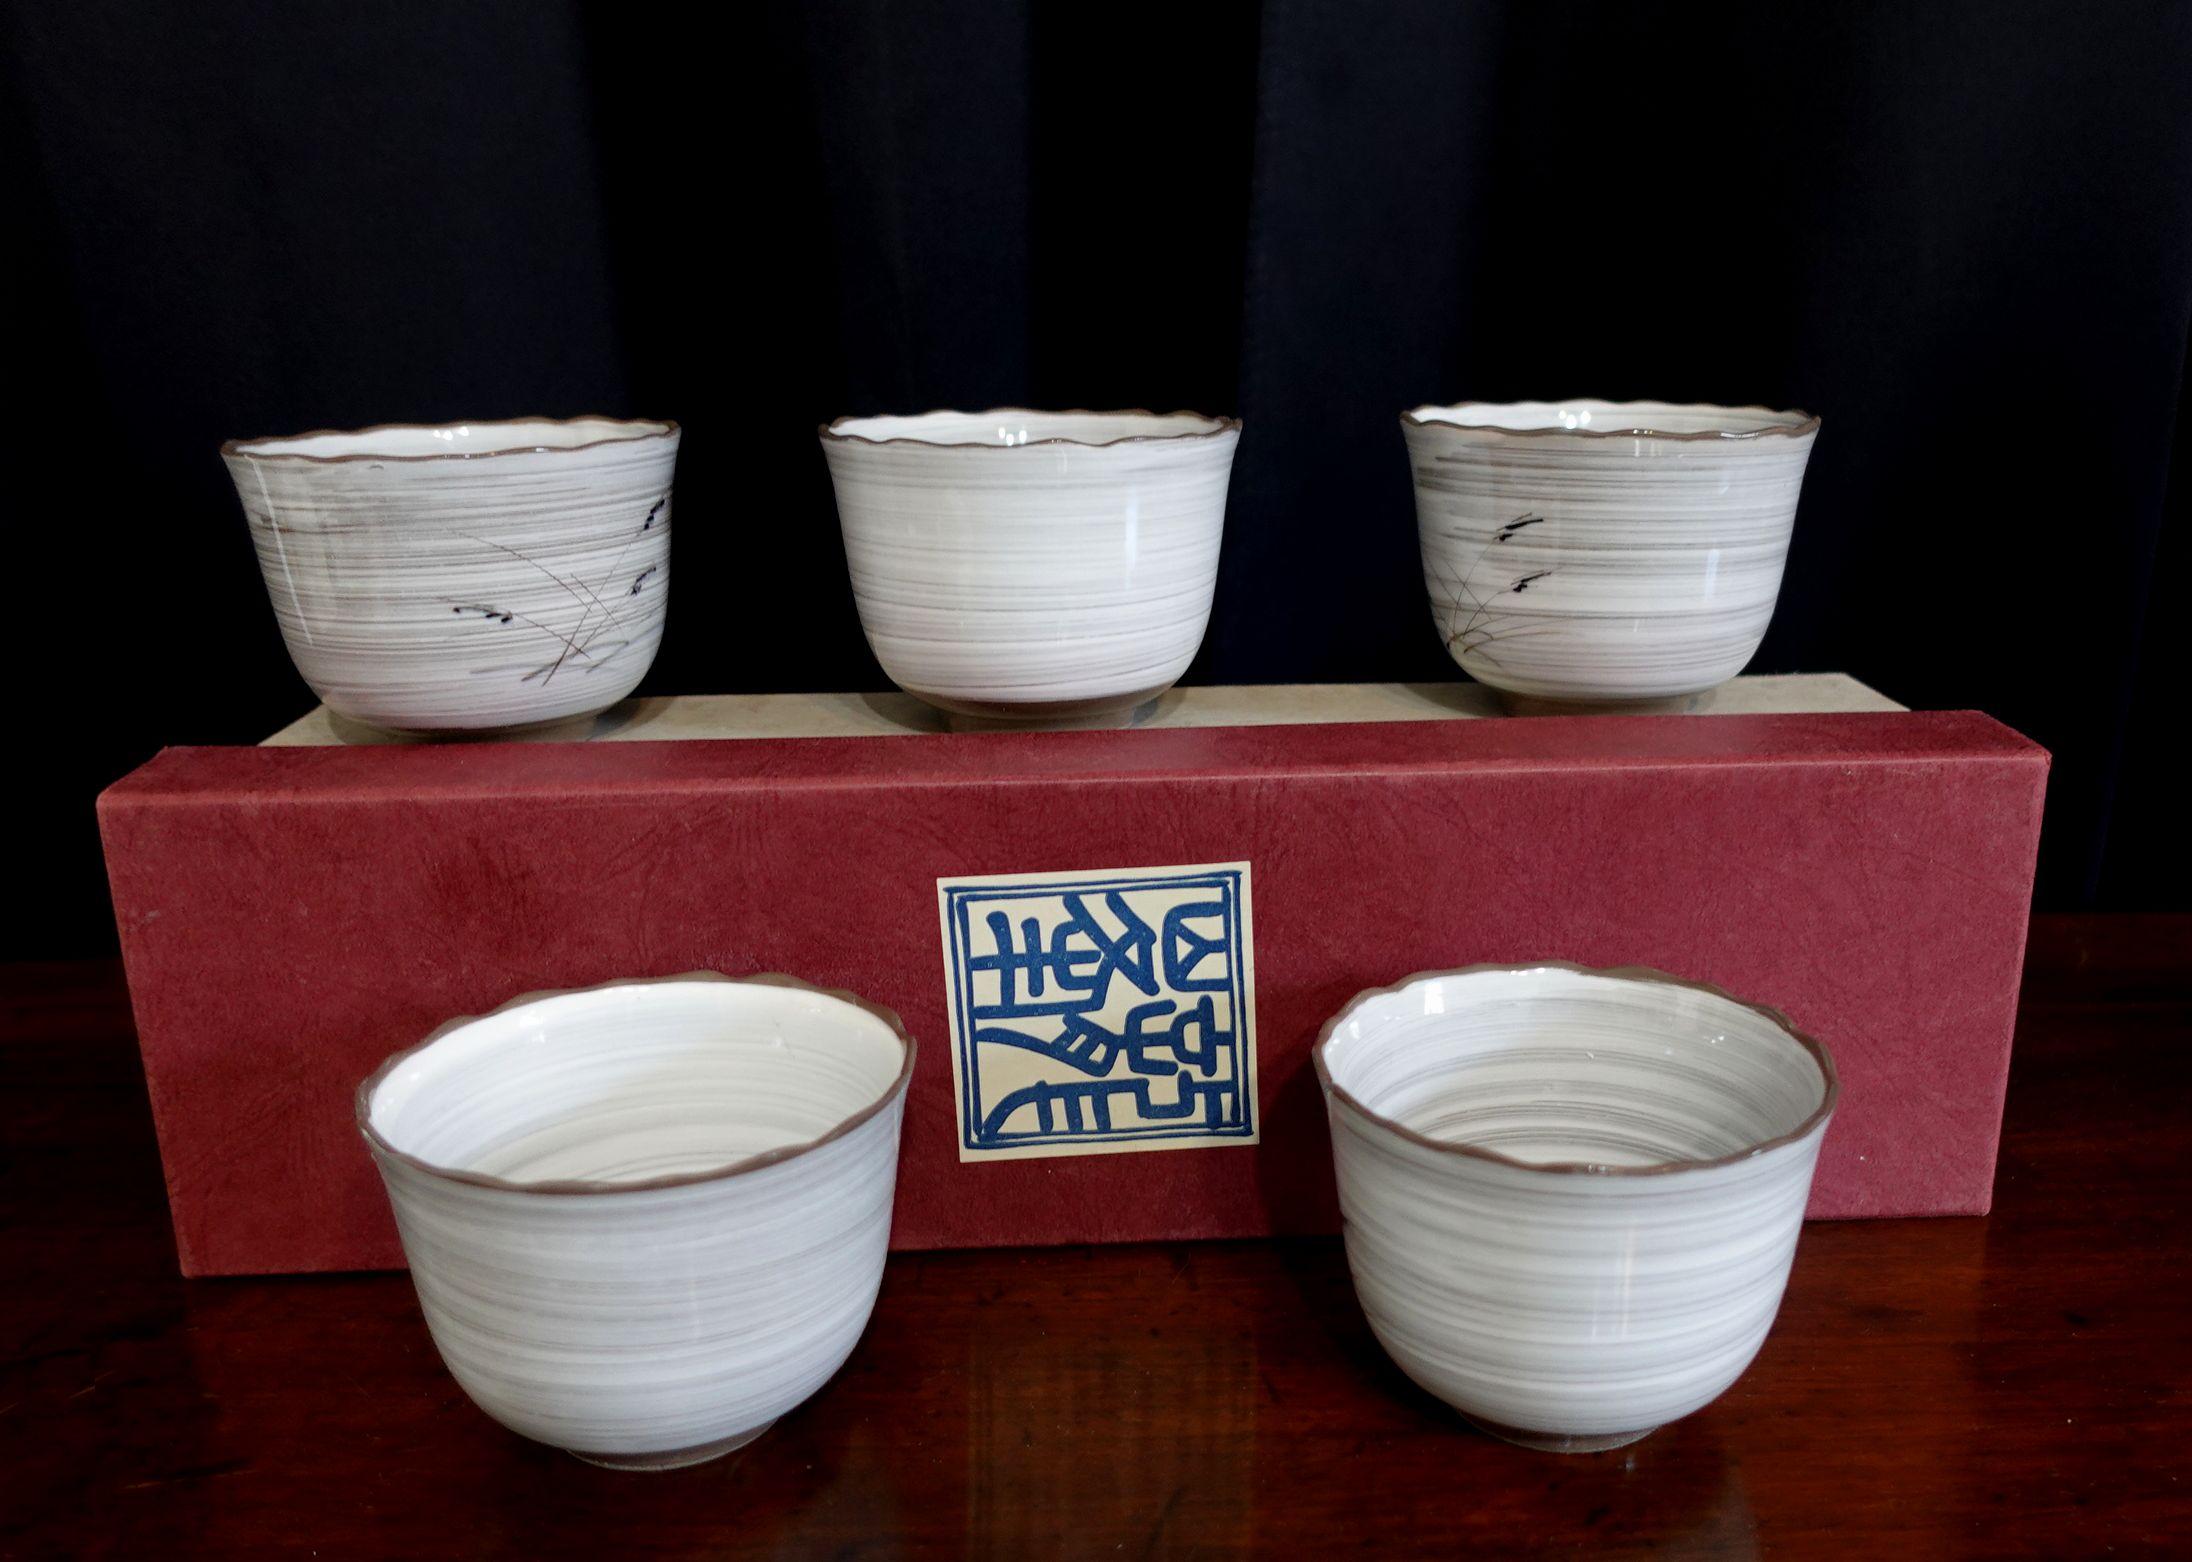 Old - set of 5 Japanese Teacups with hand-painted paintings, signed at the bottoms.
Original box included

In good original new condition and just found in the warehouse, never used before.